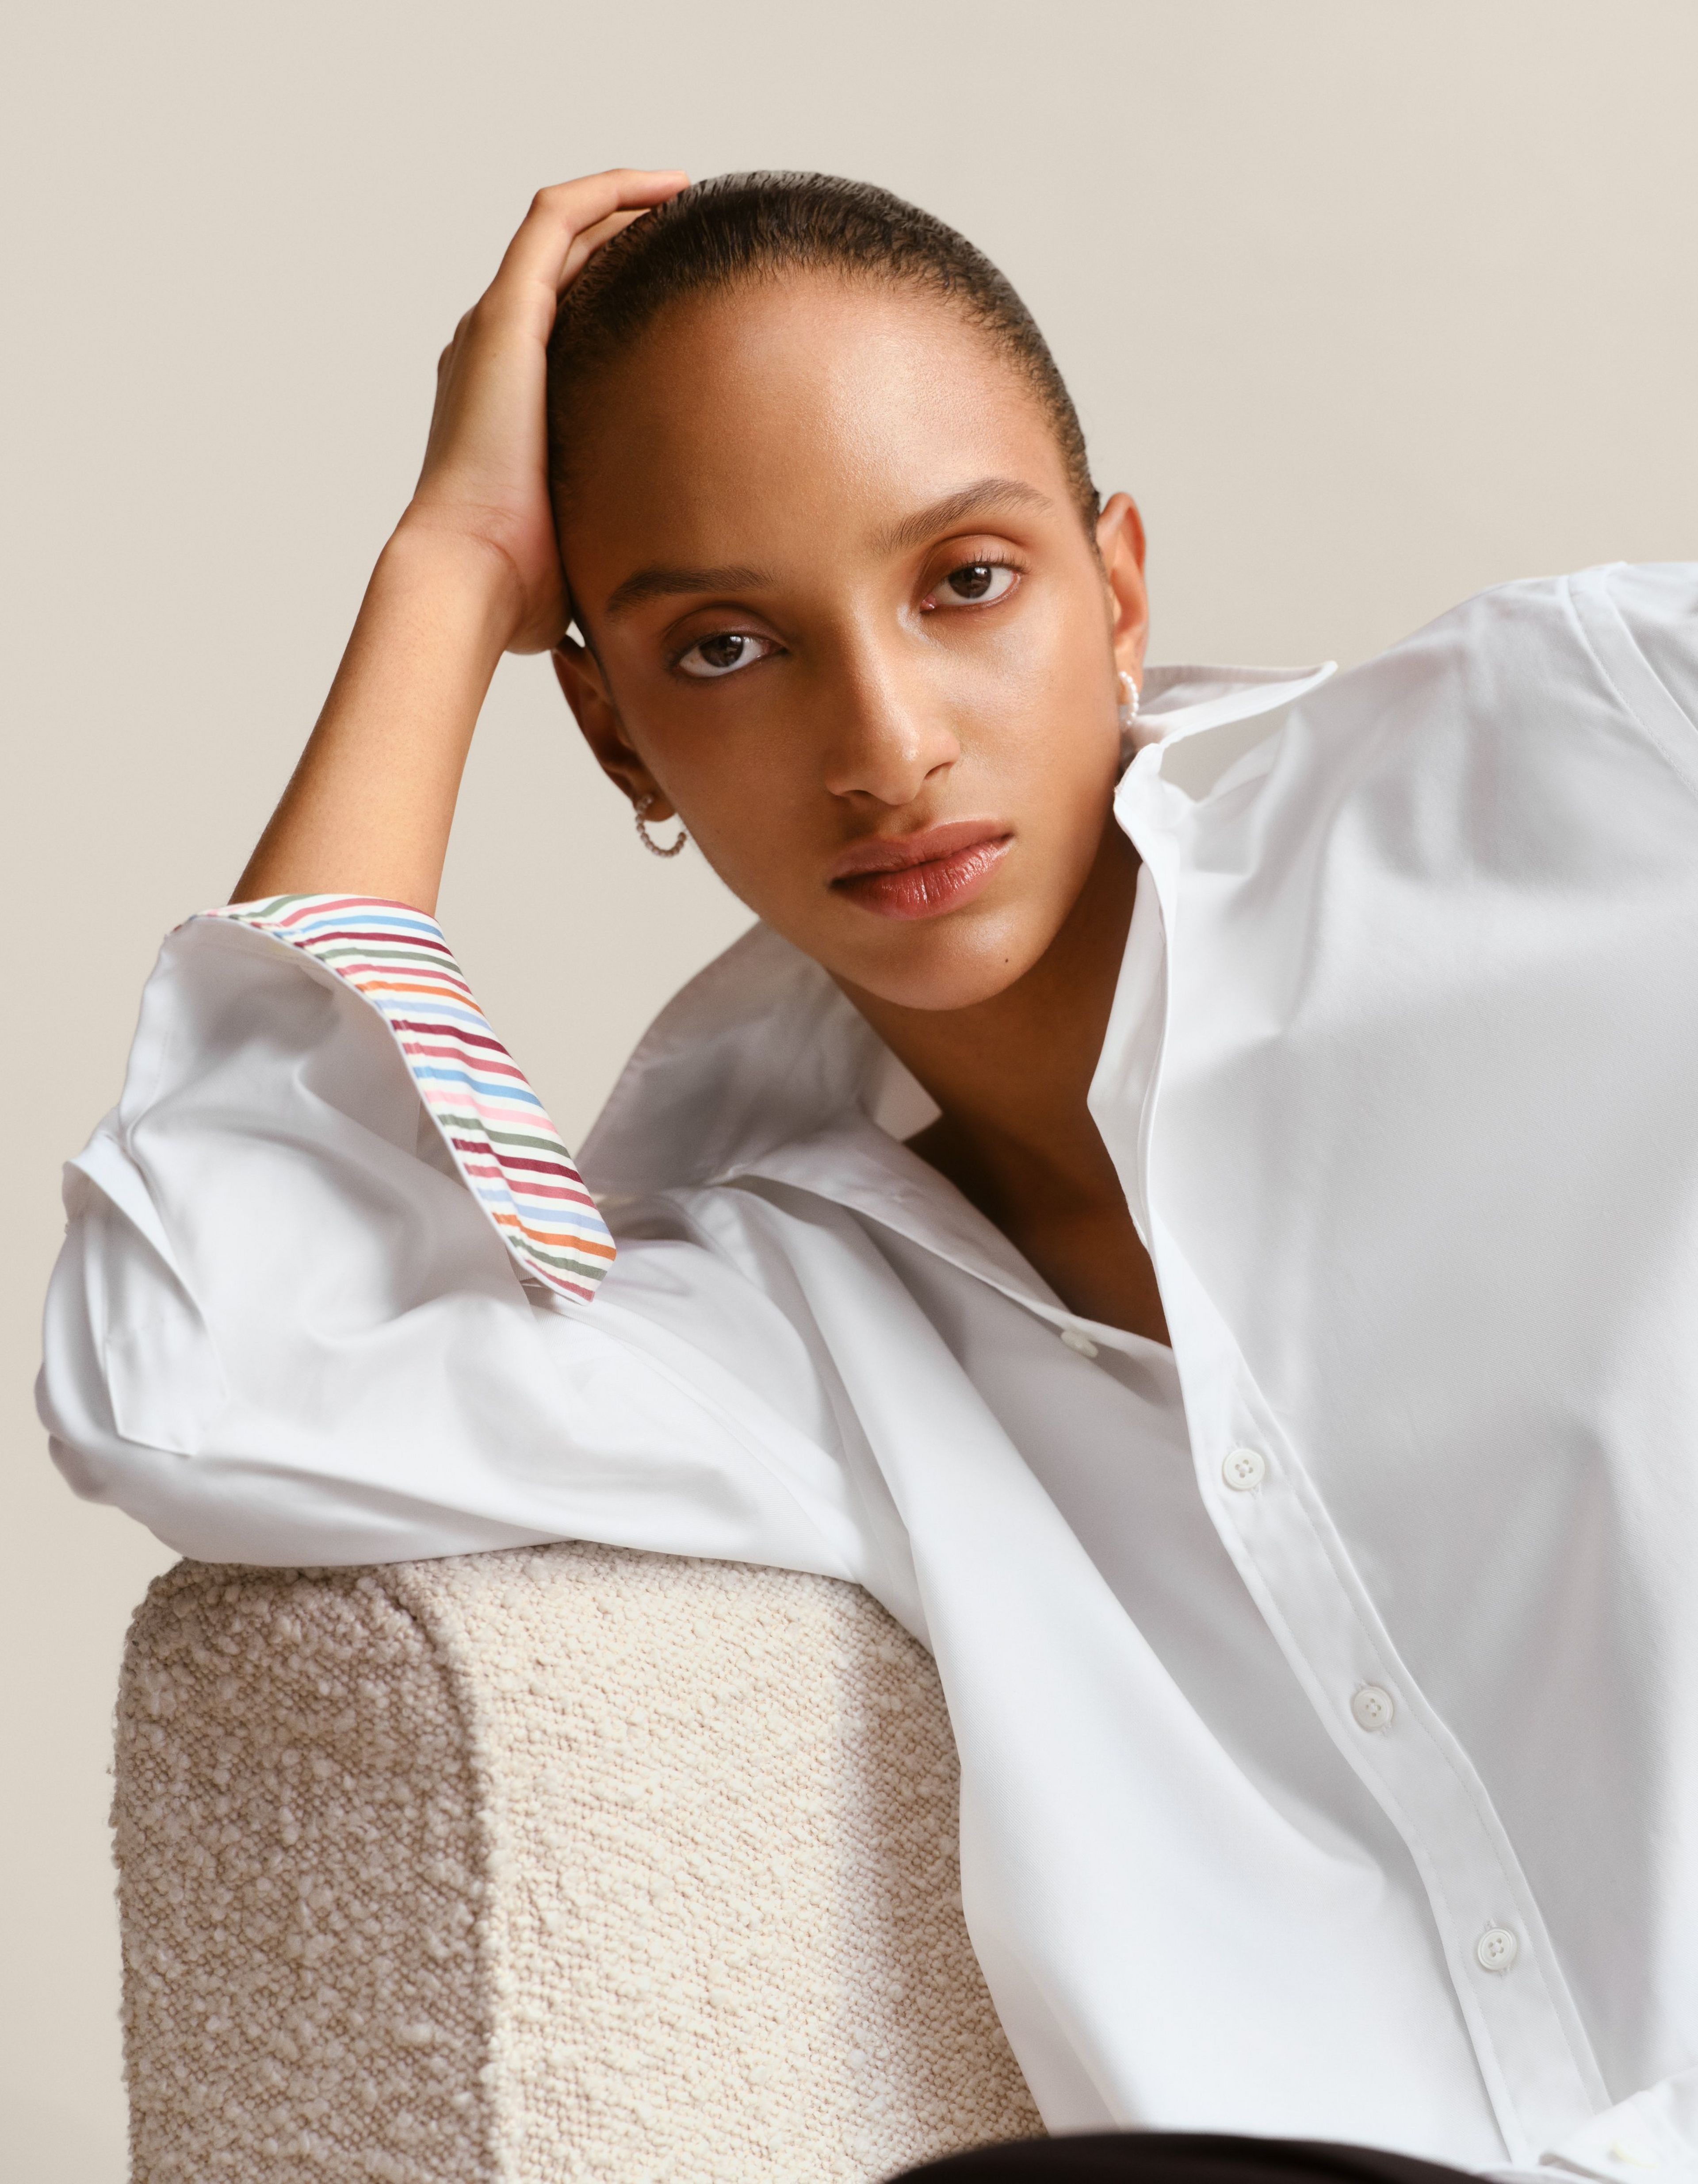 A women wears a white shirt with contrast cocktail cuffs